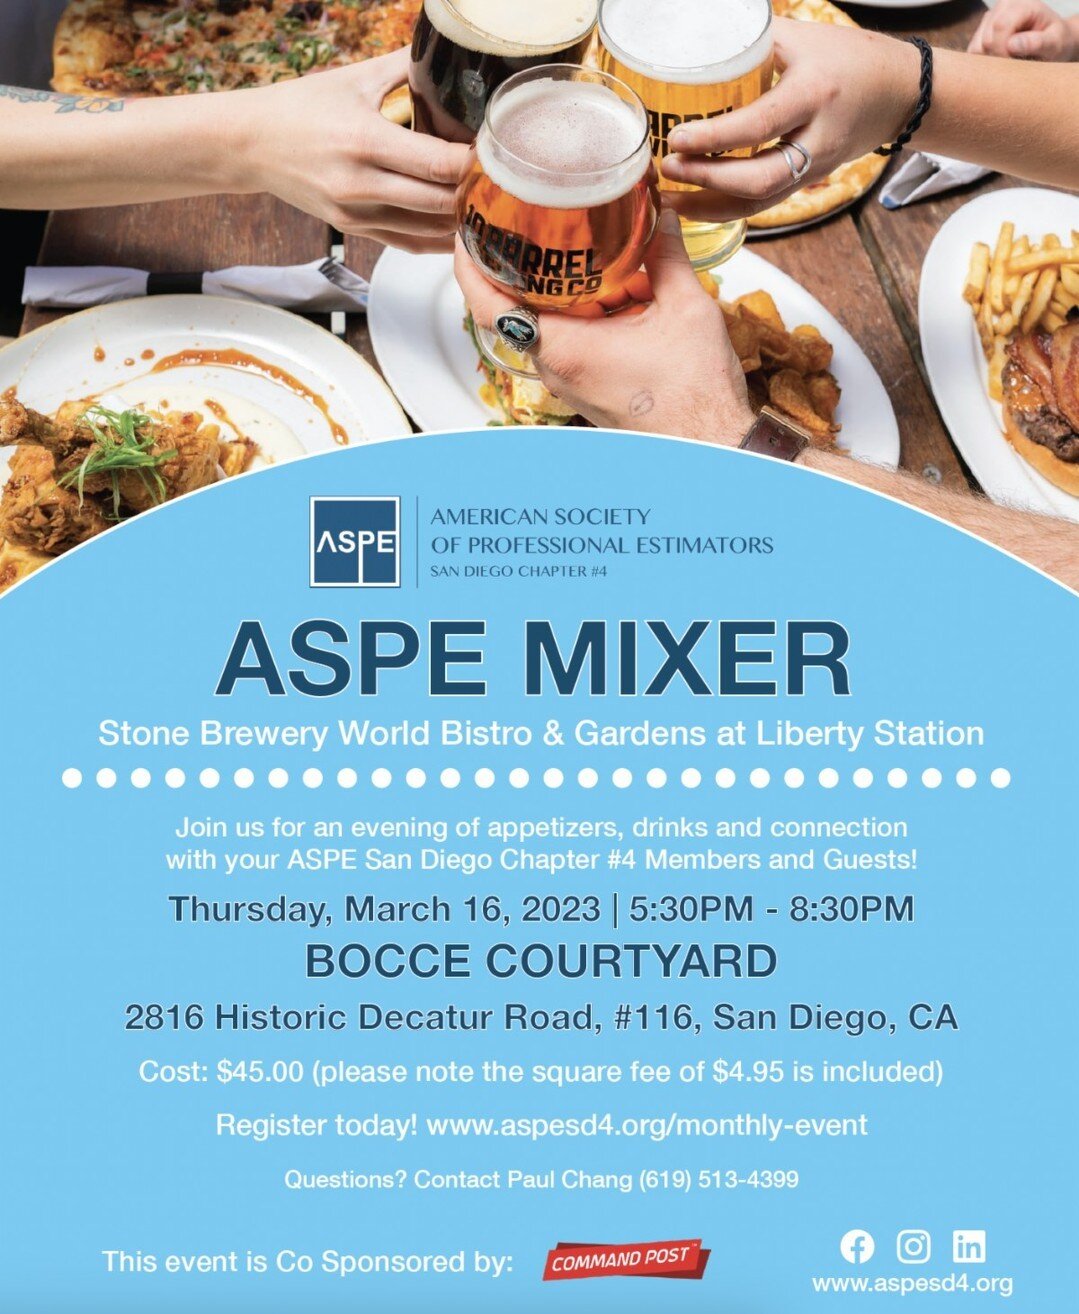 🍻ASPE San Diego Chapter #4, would like to invite you to our 2nd year mixer event at Stone Brewery at Liberty Station on March 1️⃣6️⃣, 2023 at 5:30PM. Come and enjoy networking, meeting the ASPE San Diego Board, having some appetizers and if you are 